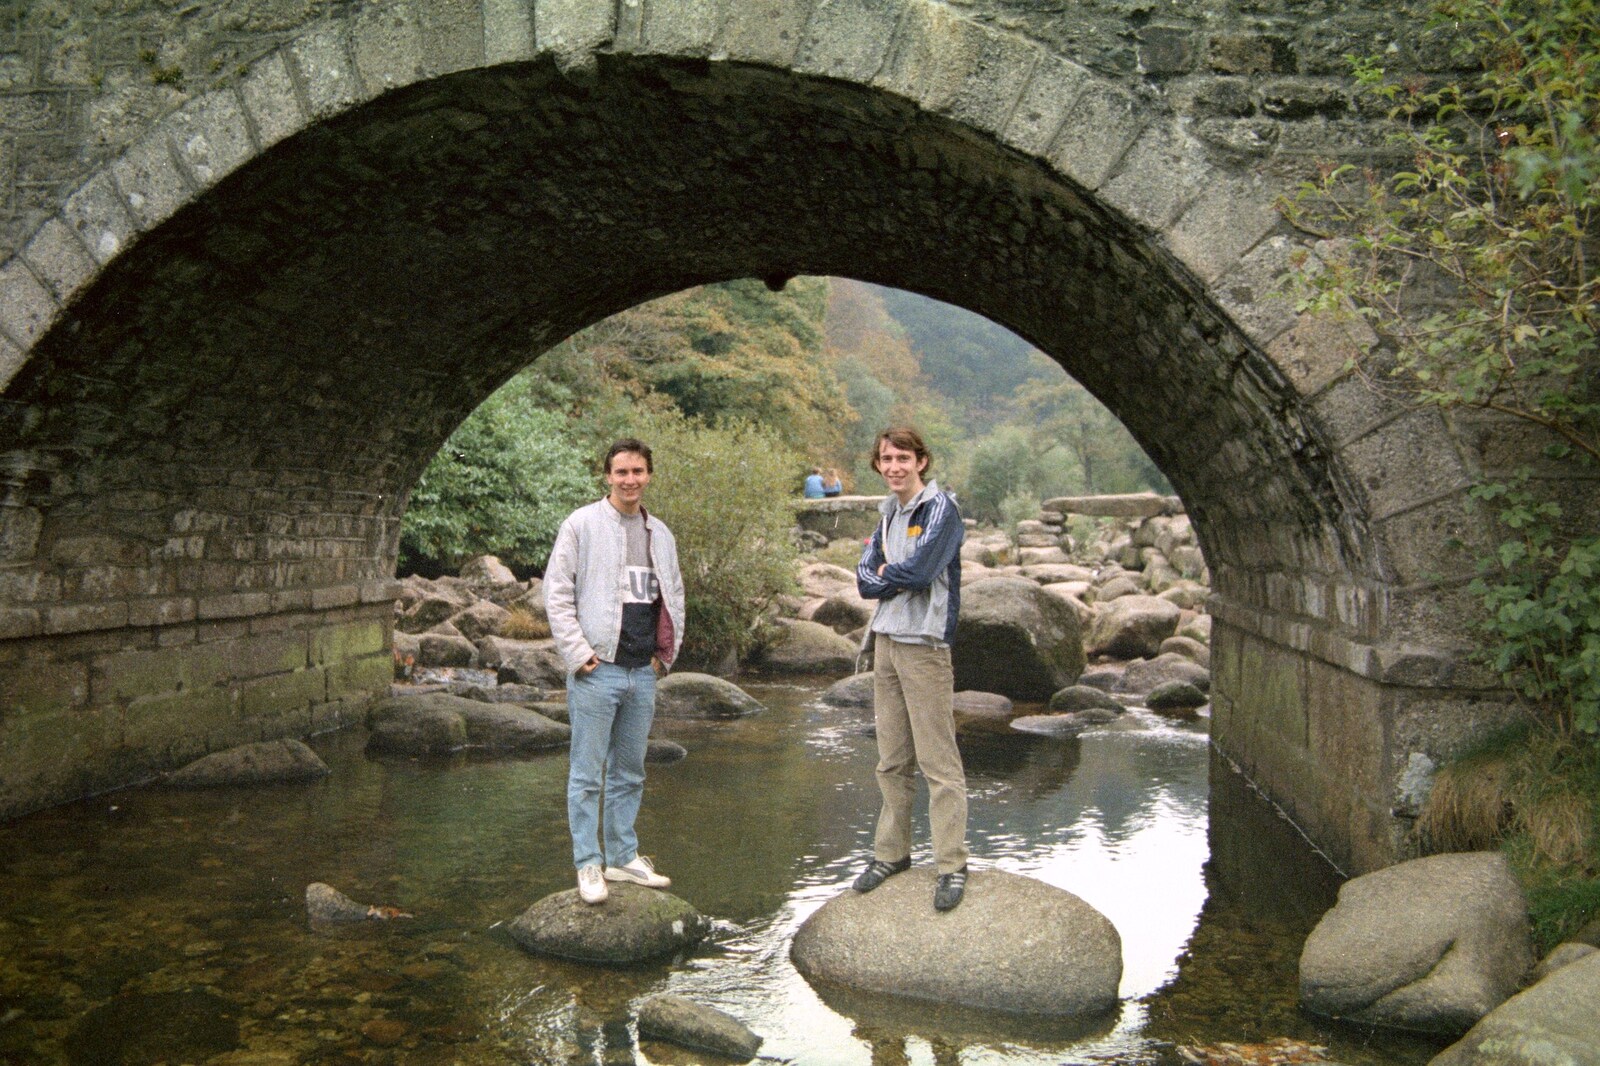 Riki and Dave under the bridge at Badger's Holt from A Trip to Trotsky's Mount, Dartmoor, Devon - 20th March 1987